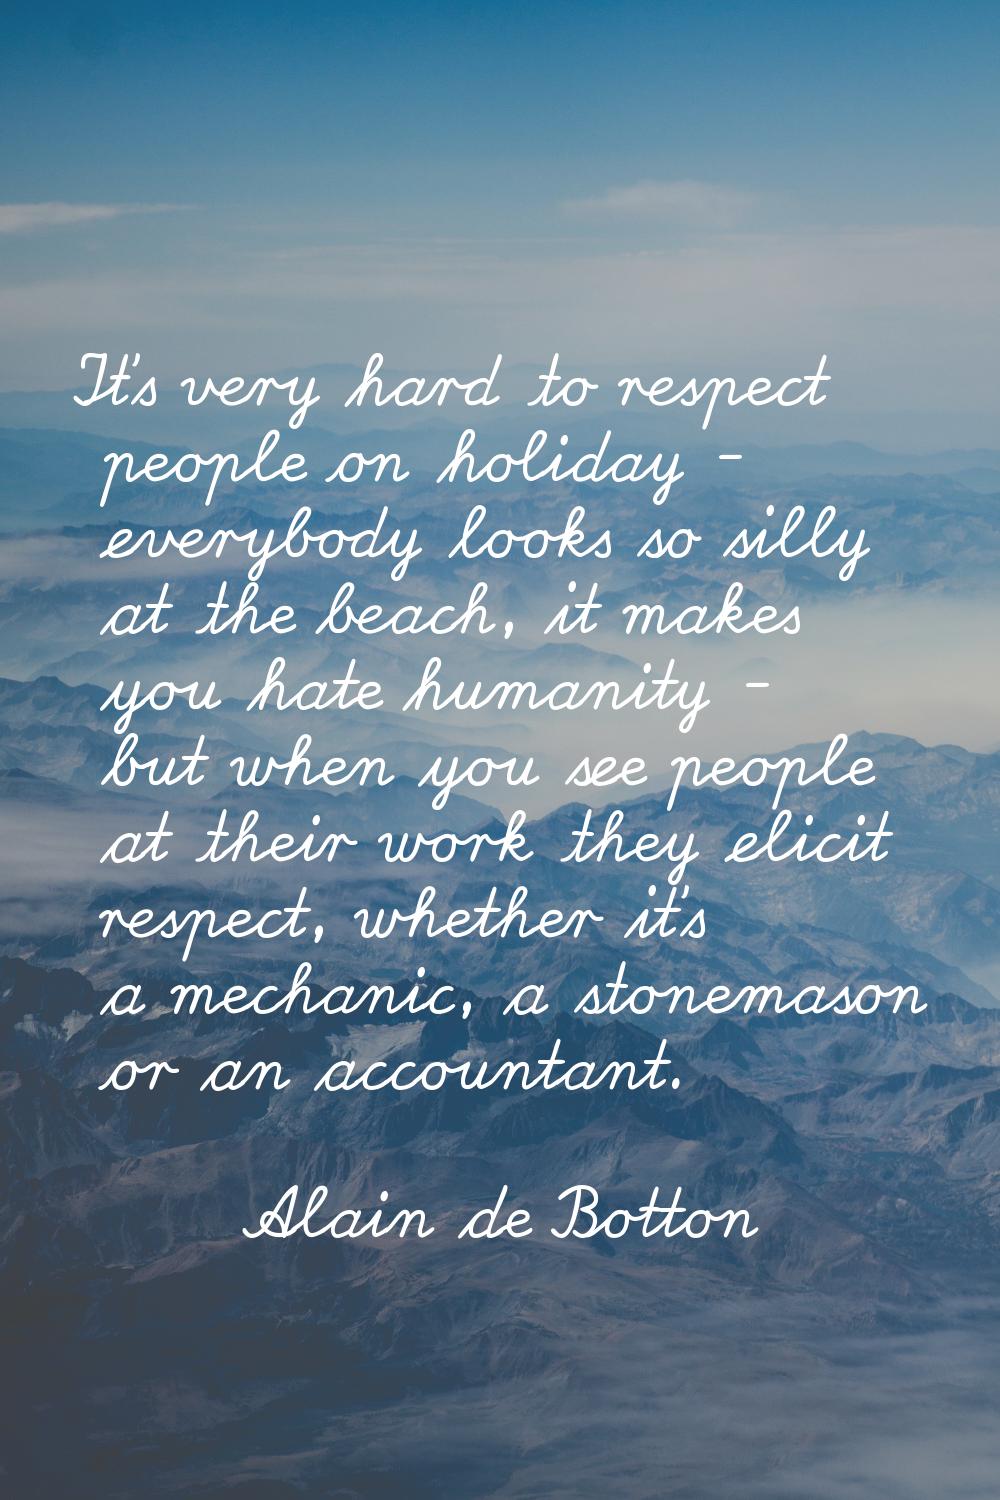 It's very hard to respect people on holiday - everybody looks so silly at the beach, it makes you h